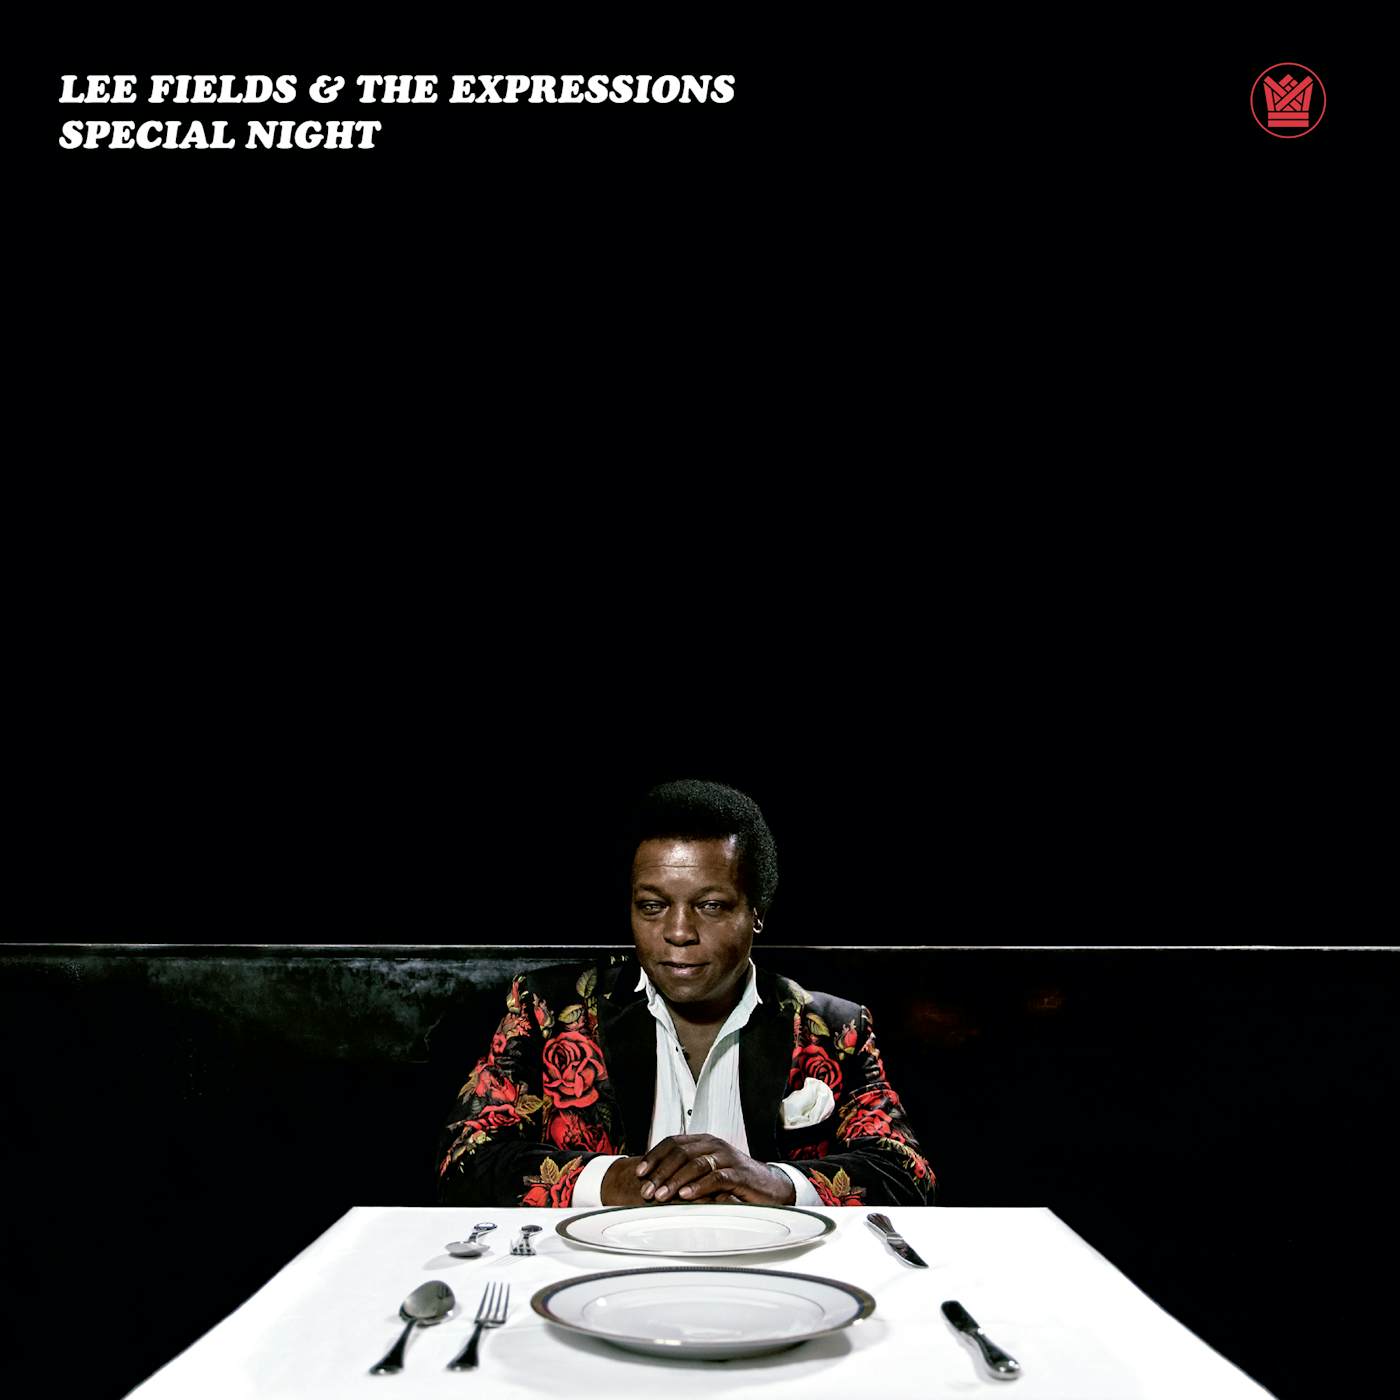 Lee Fields & The Expressions SPECIAL NIGHT CD